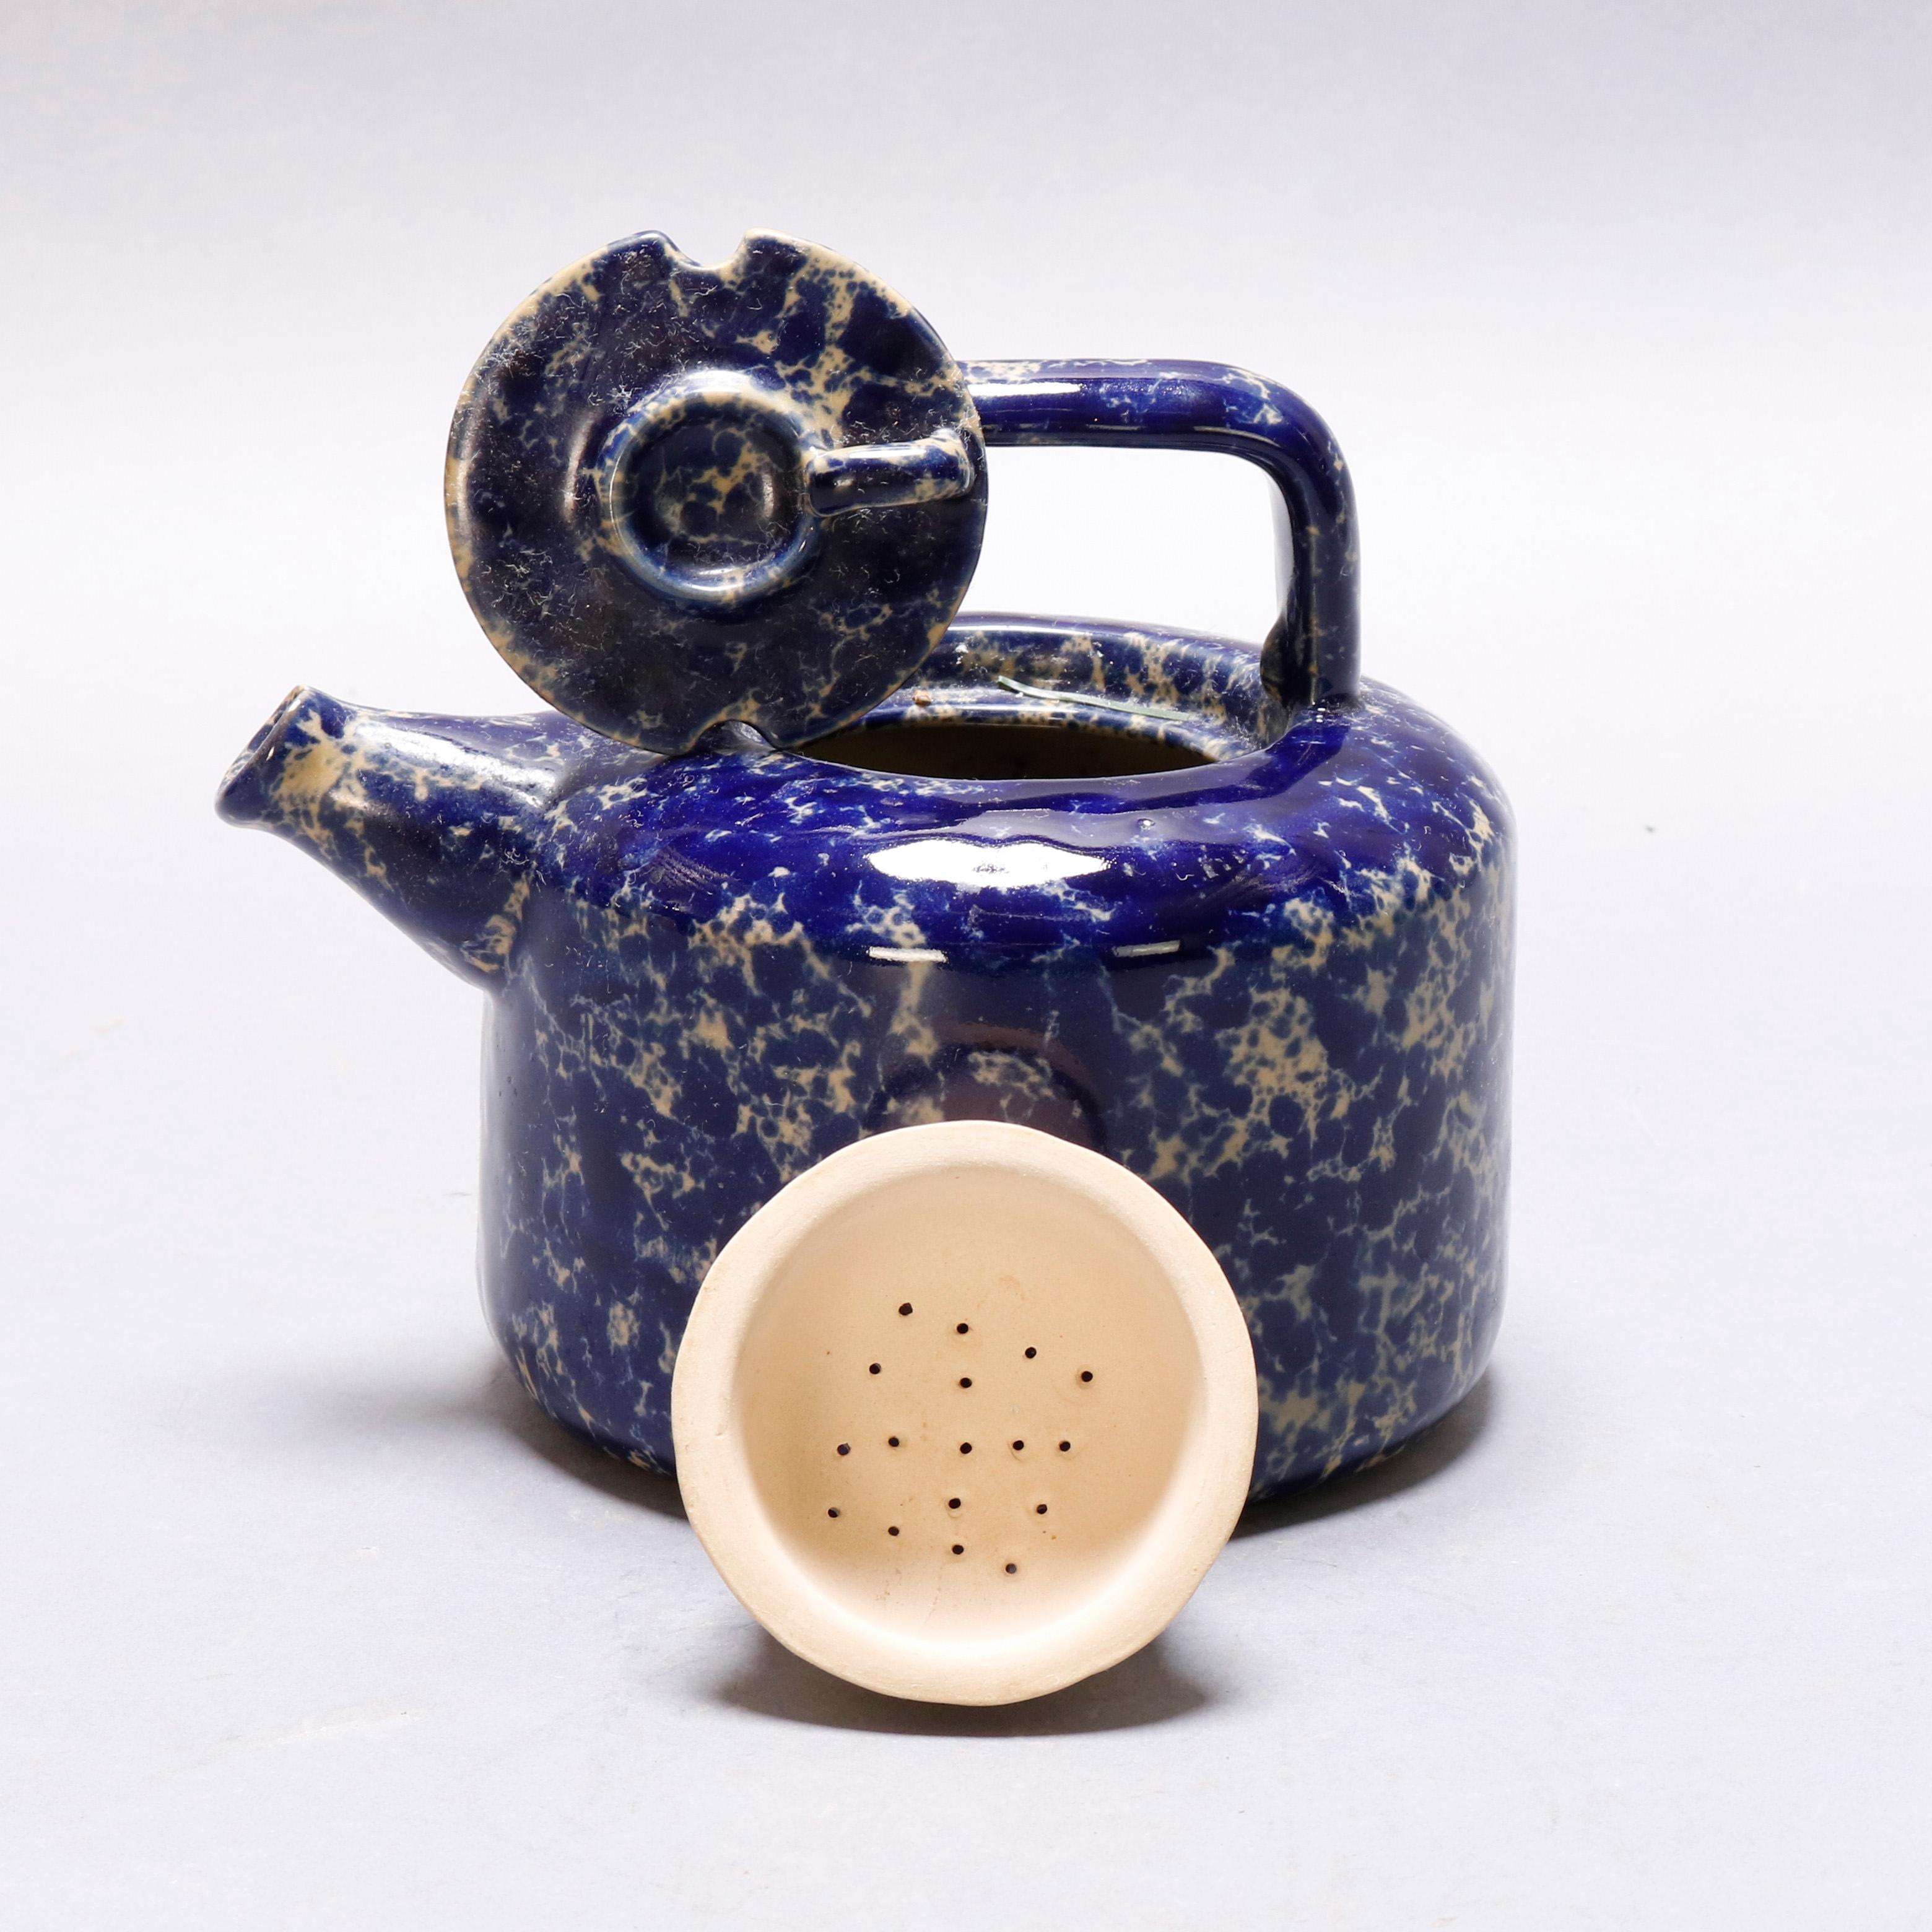 An antique ceramic teapot offers cobalt blue spongewear decoration and includes lid and strainer, 19th century

Measures - 6.5